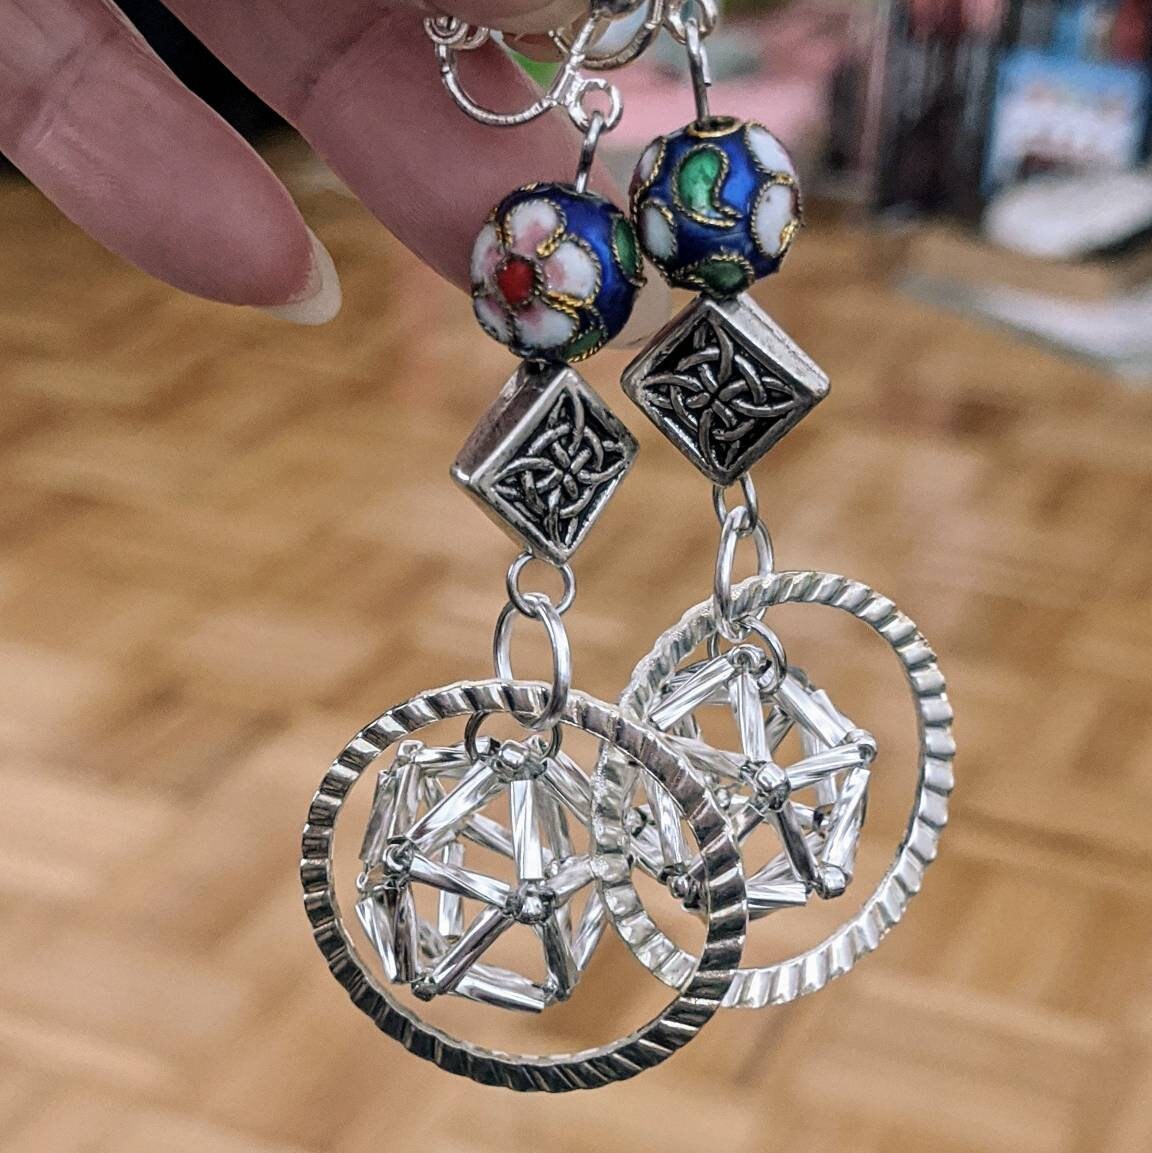 Icosahedron D20 Silver Earrings with Cobalt Cloisonne Beads